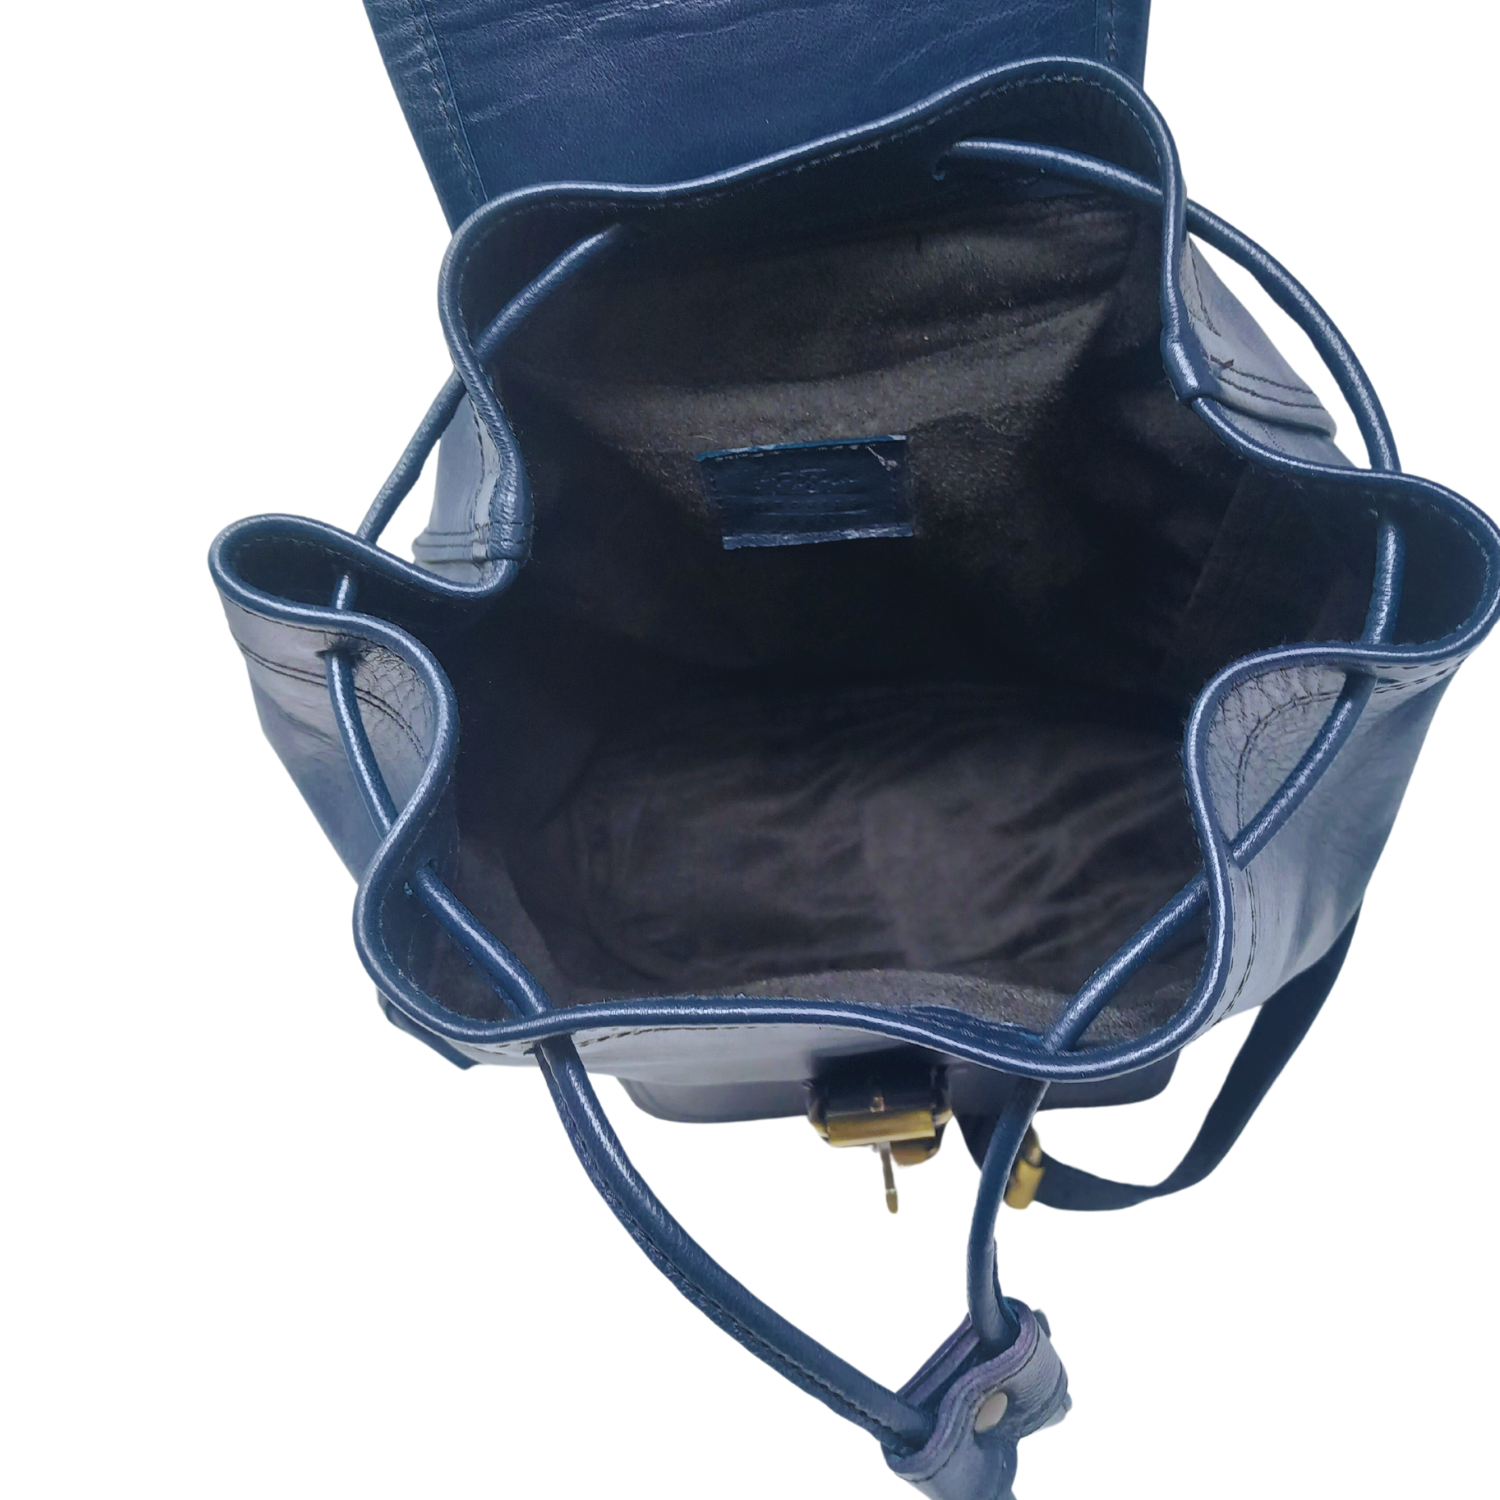 Sac a Dos blue Leather Backpack